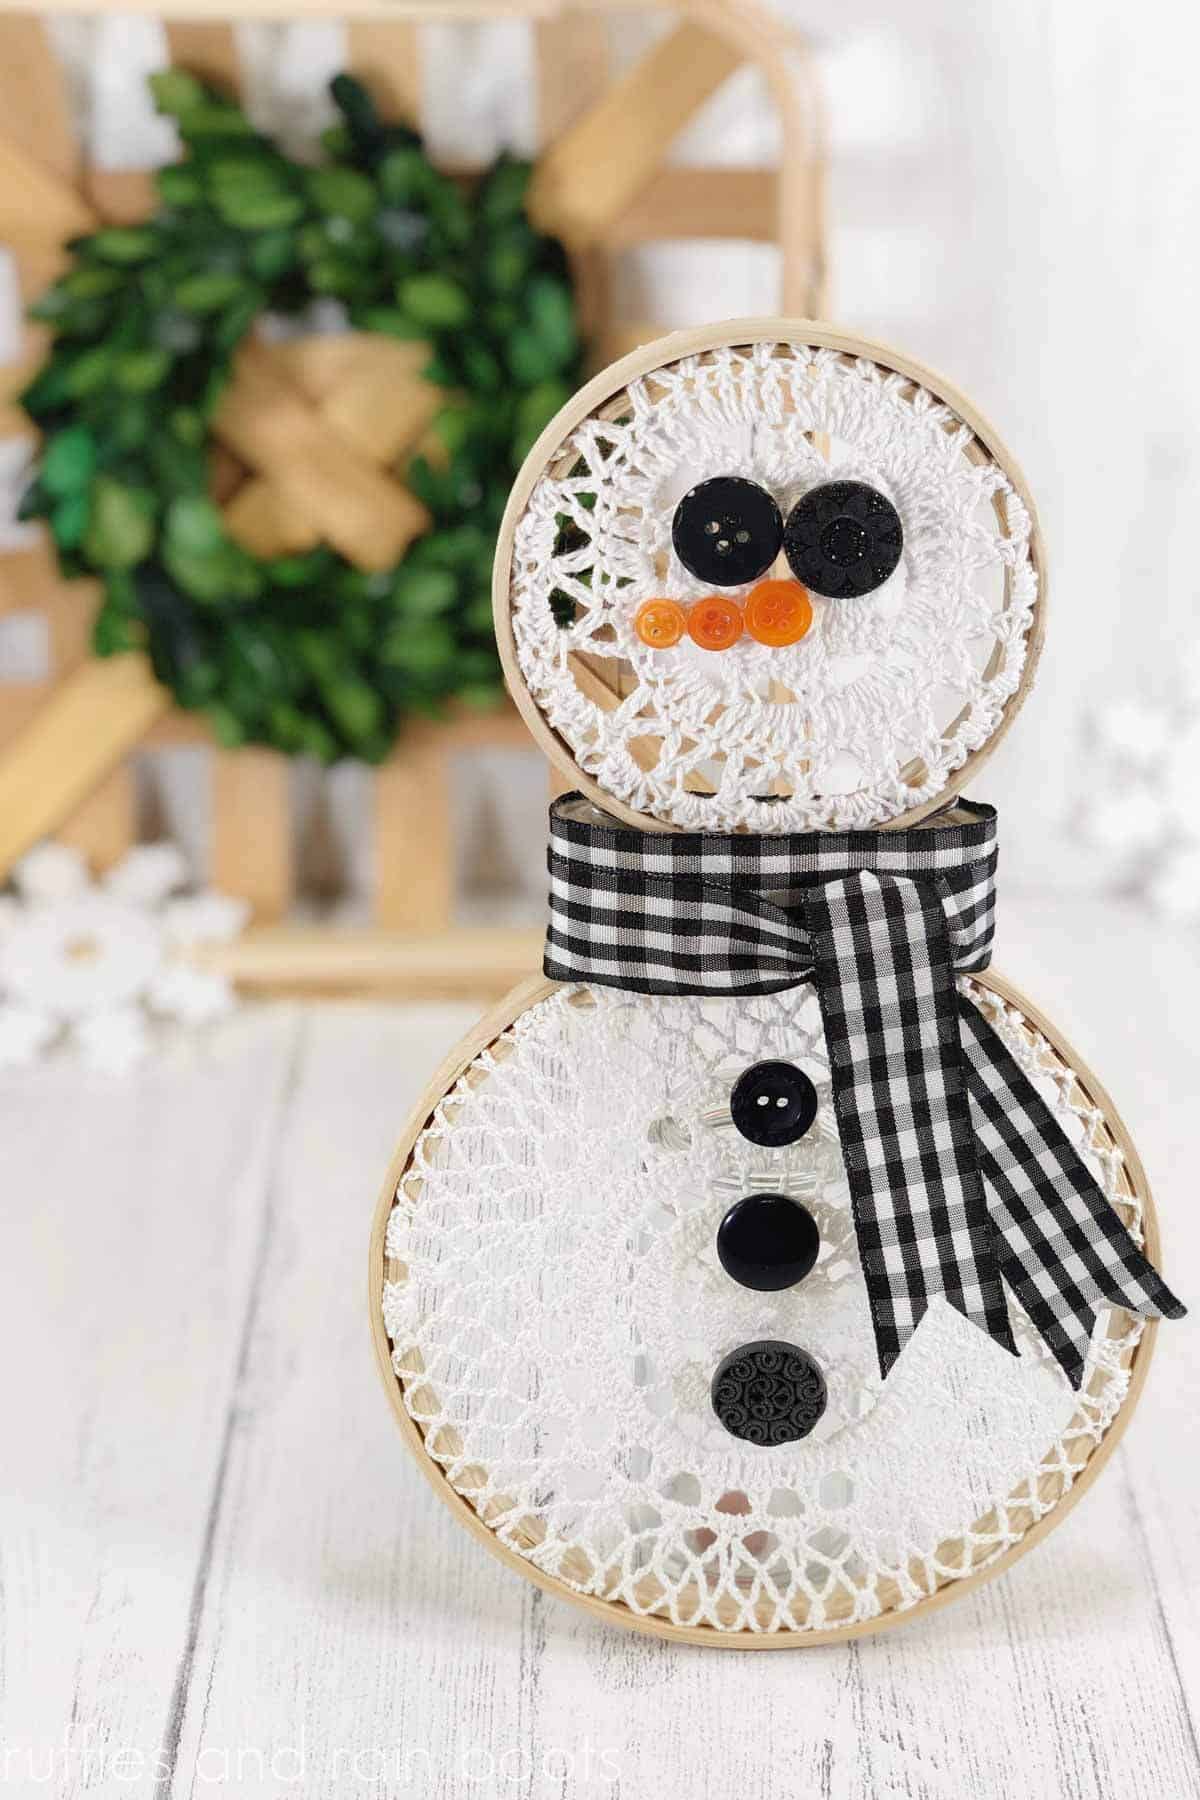 Vertical image showing a white lace snowman made from small embroidery hoops and pre-made cotton doilies in front of a farmhouse background of green wreath, tobacco basket, and white wood.